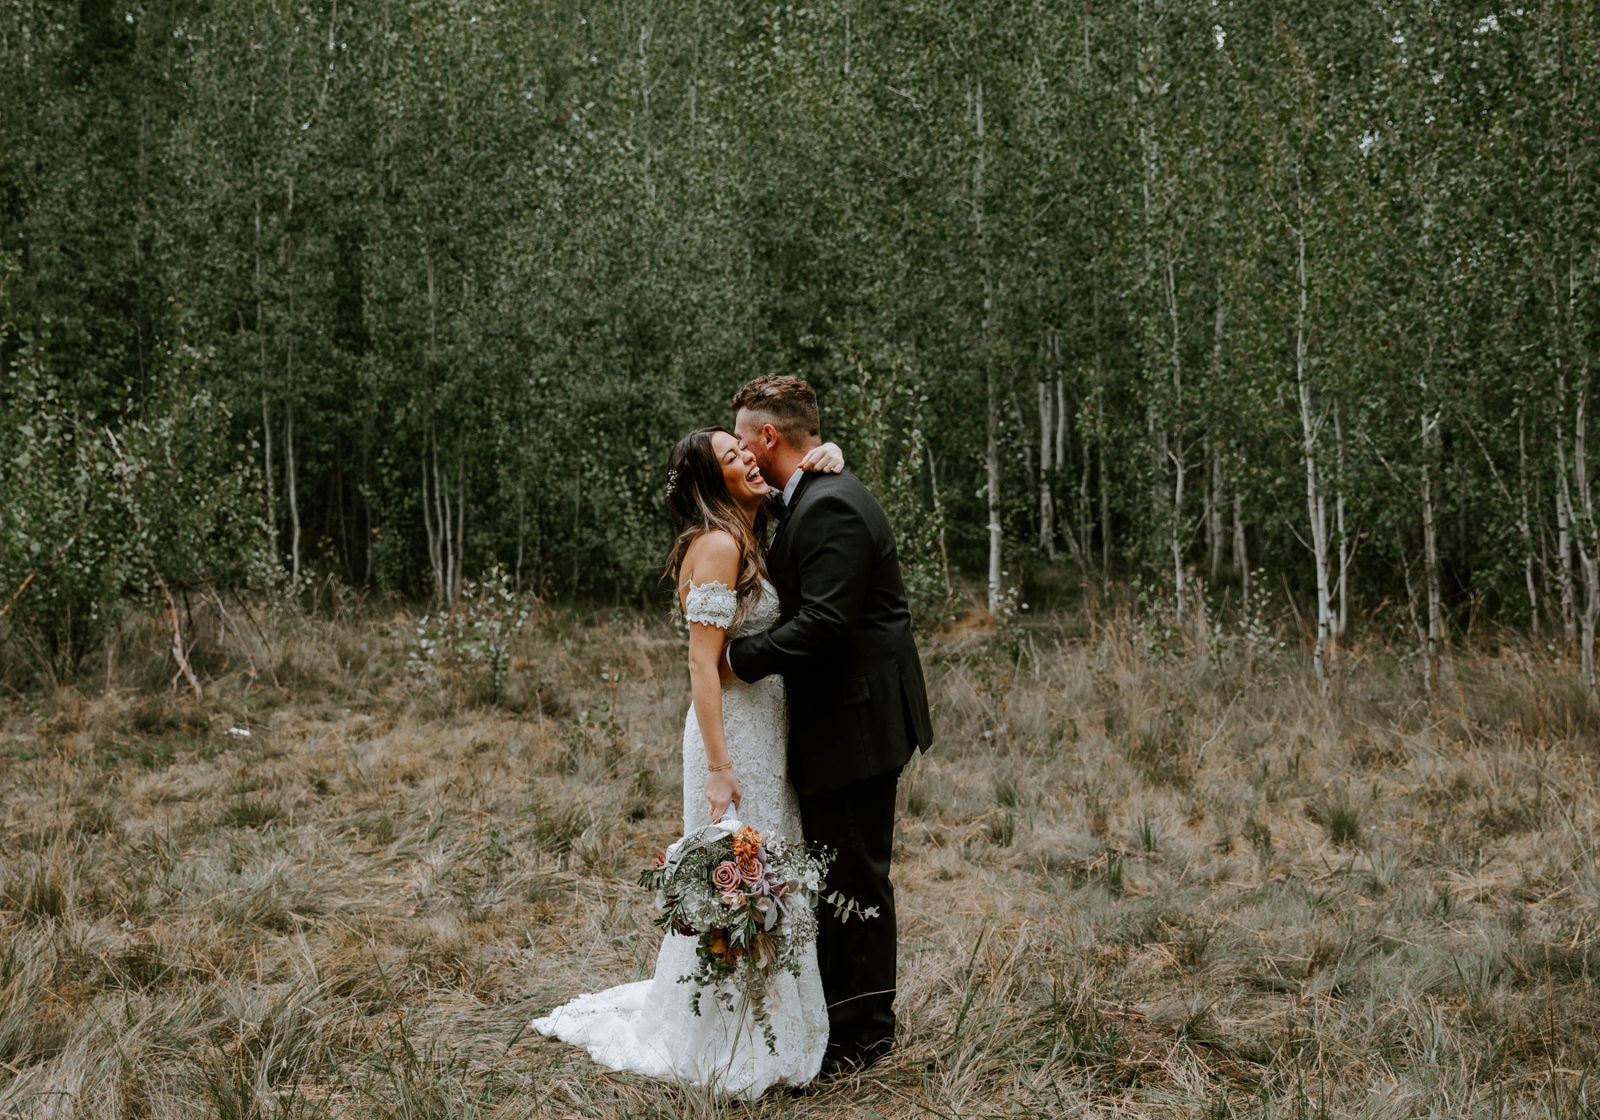 Bride and groom hugging in front of the aspen groves at shevlin park while the bride laughs